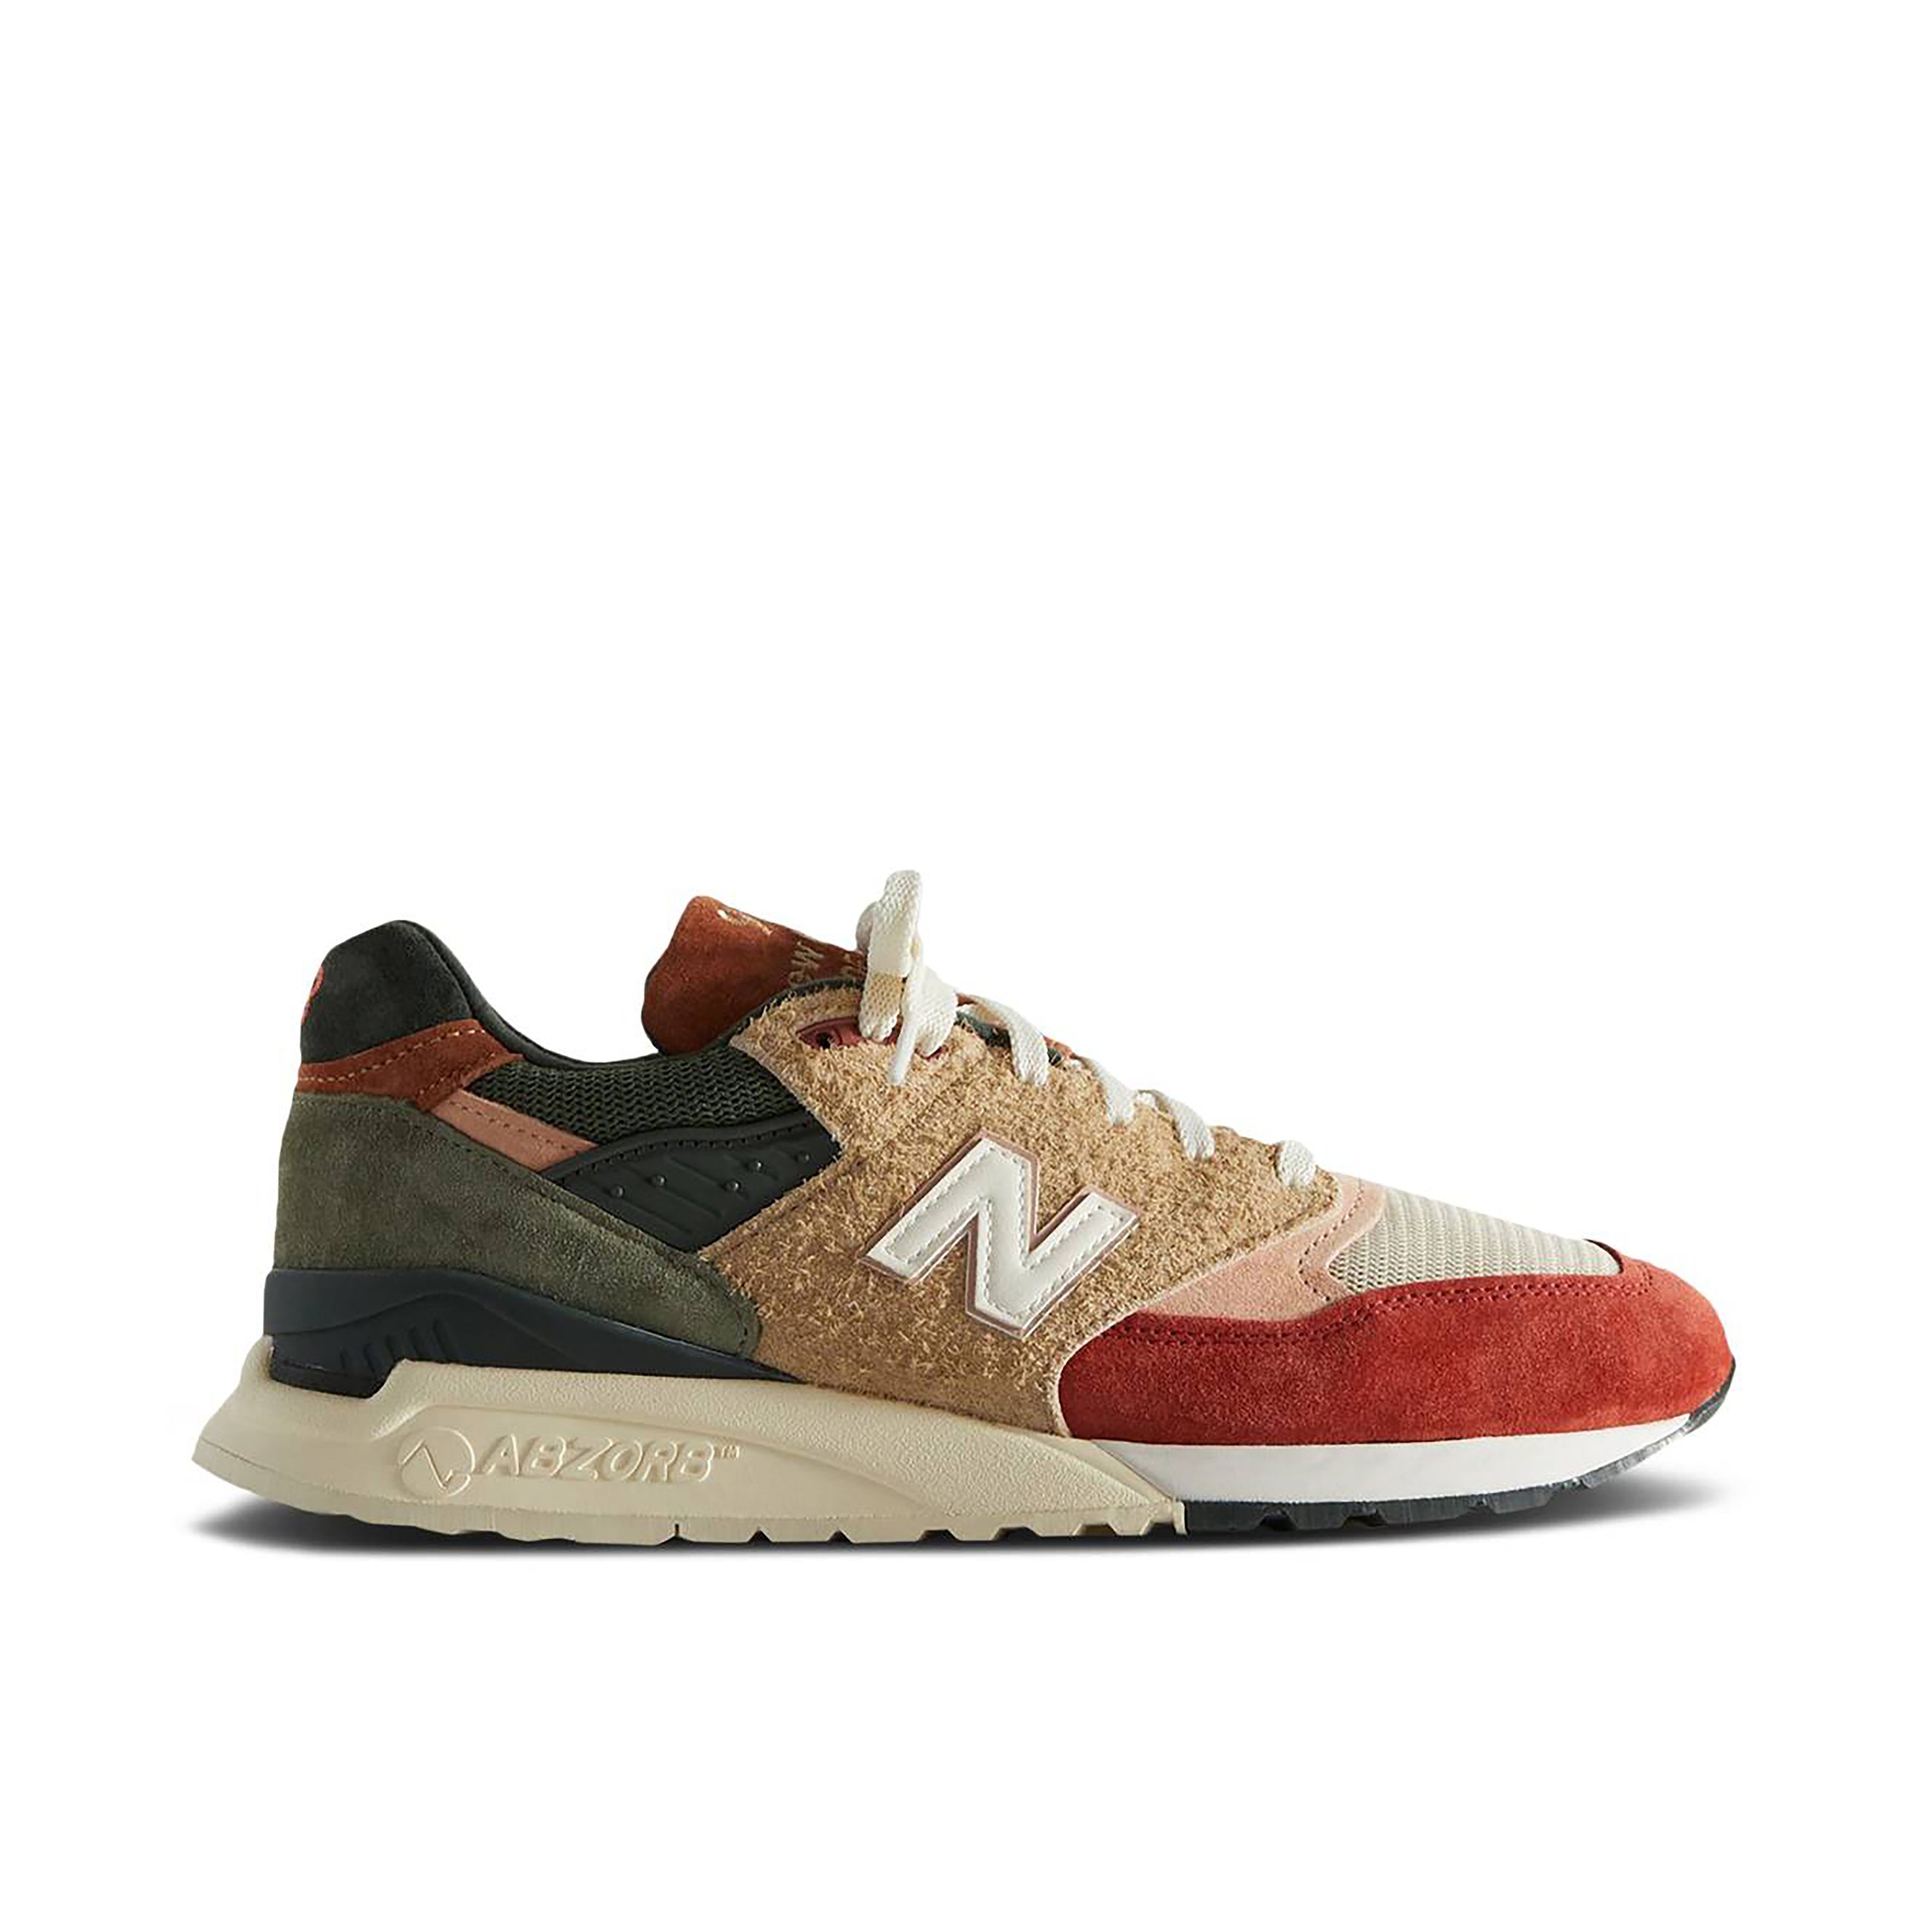 The Detroiters New Balance 998 | SneakerNews.com